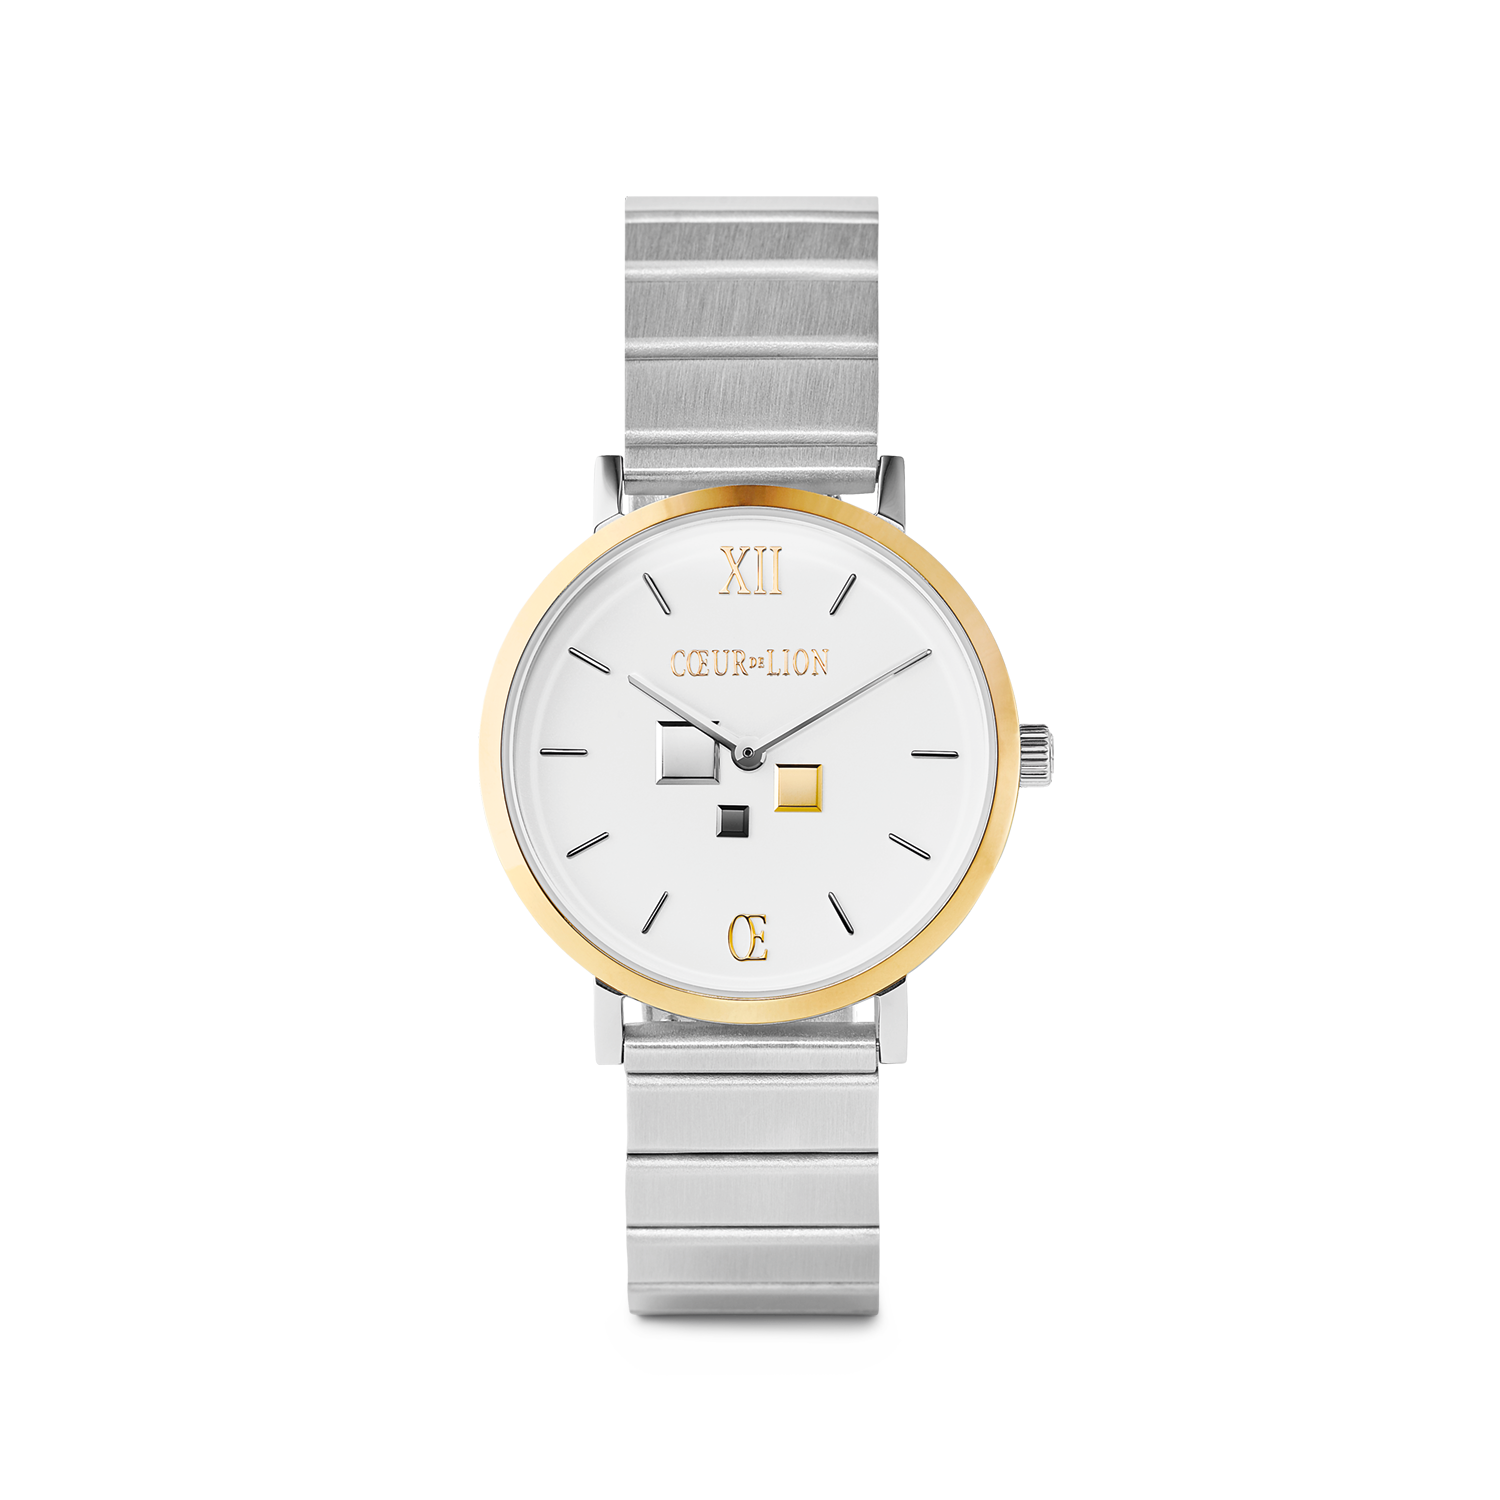 Watch Round Brilliant White Bicolor Stainless Steel Silver